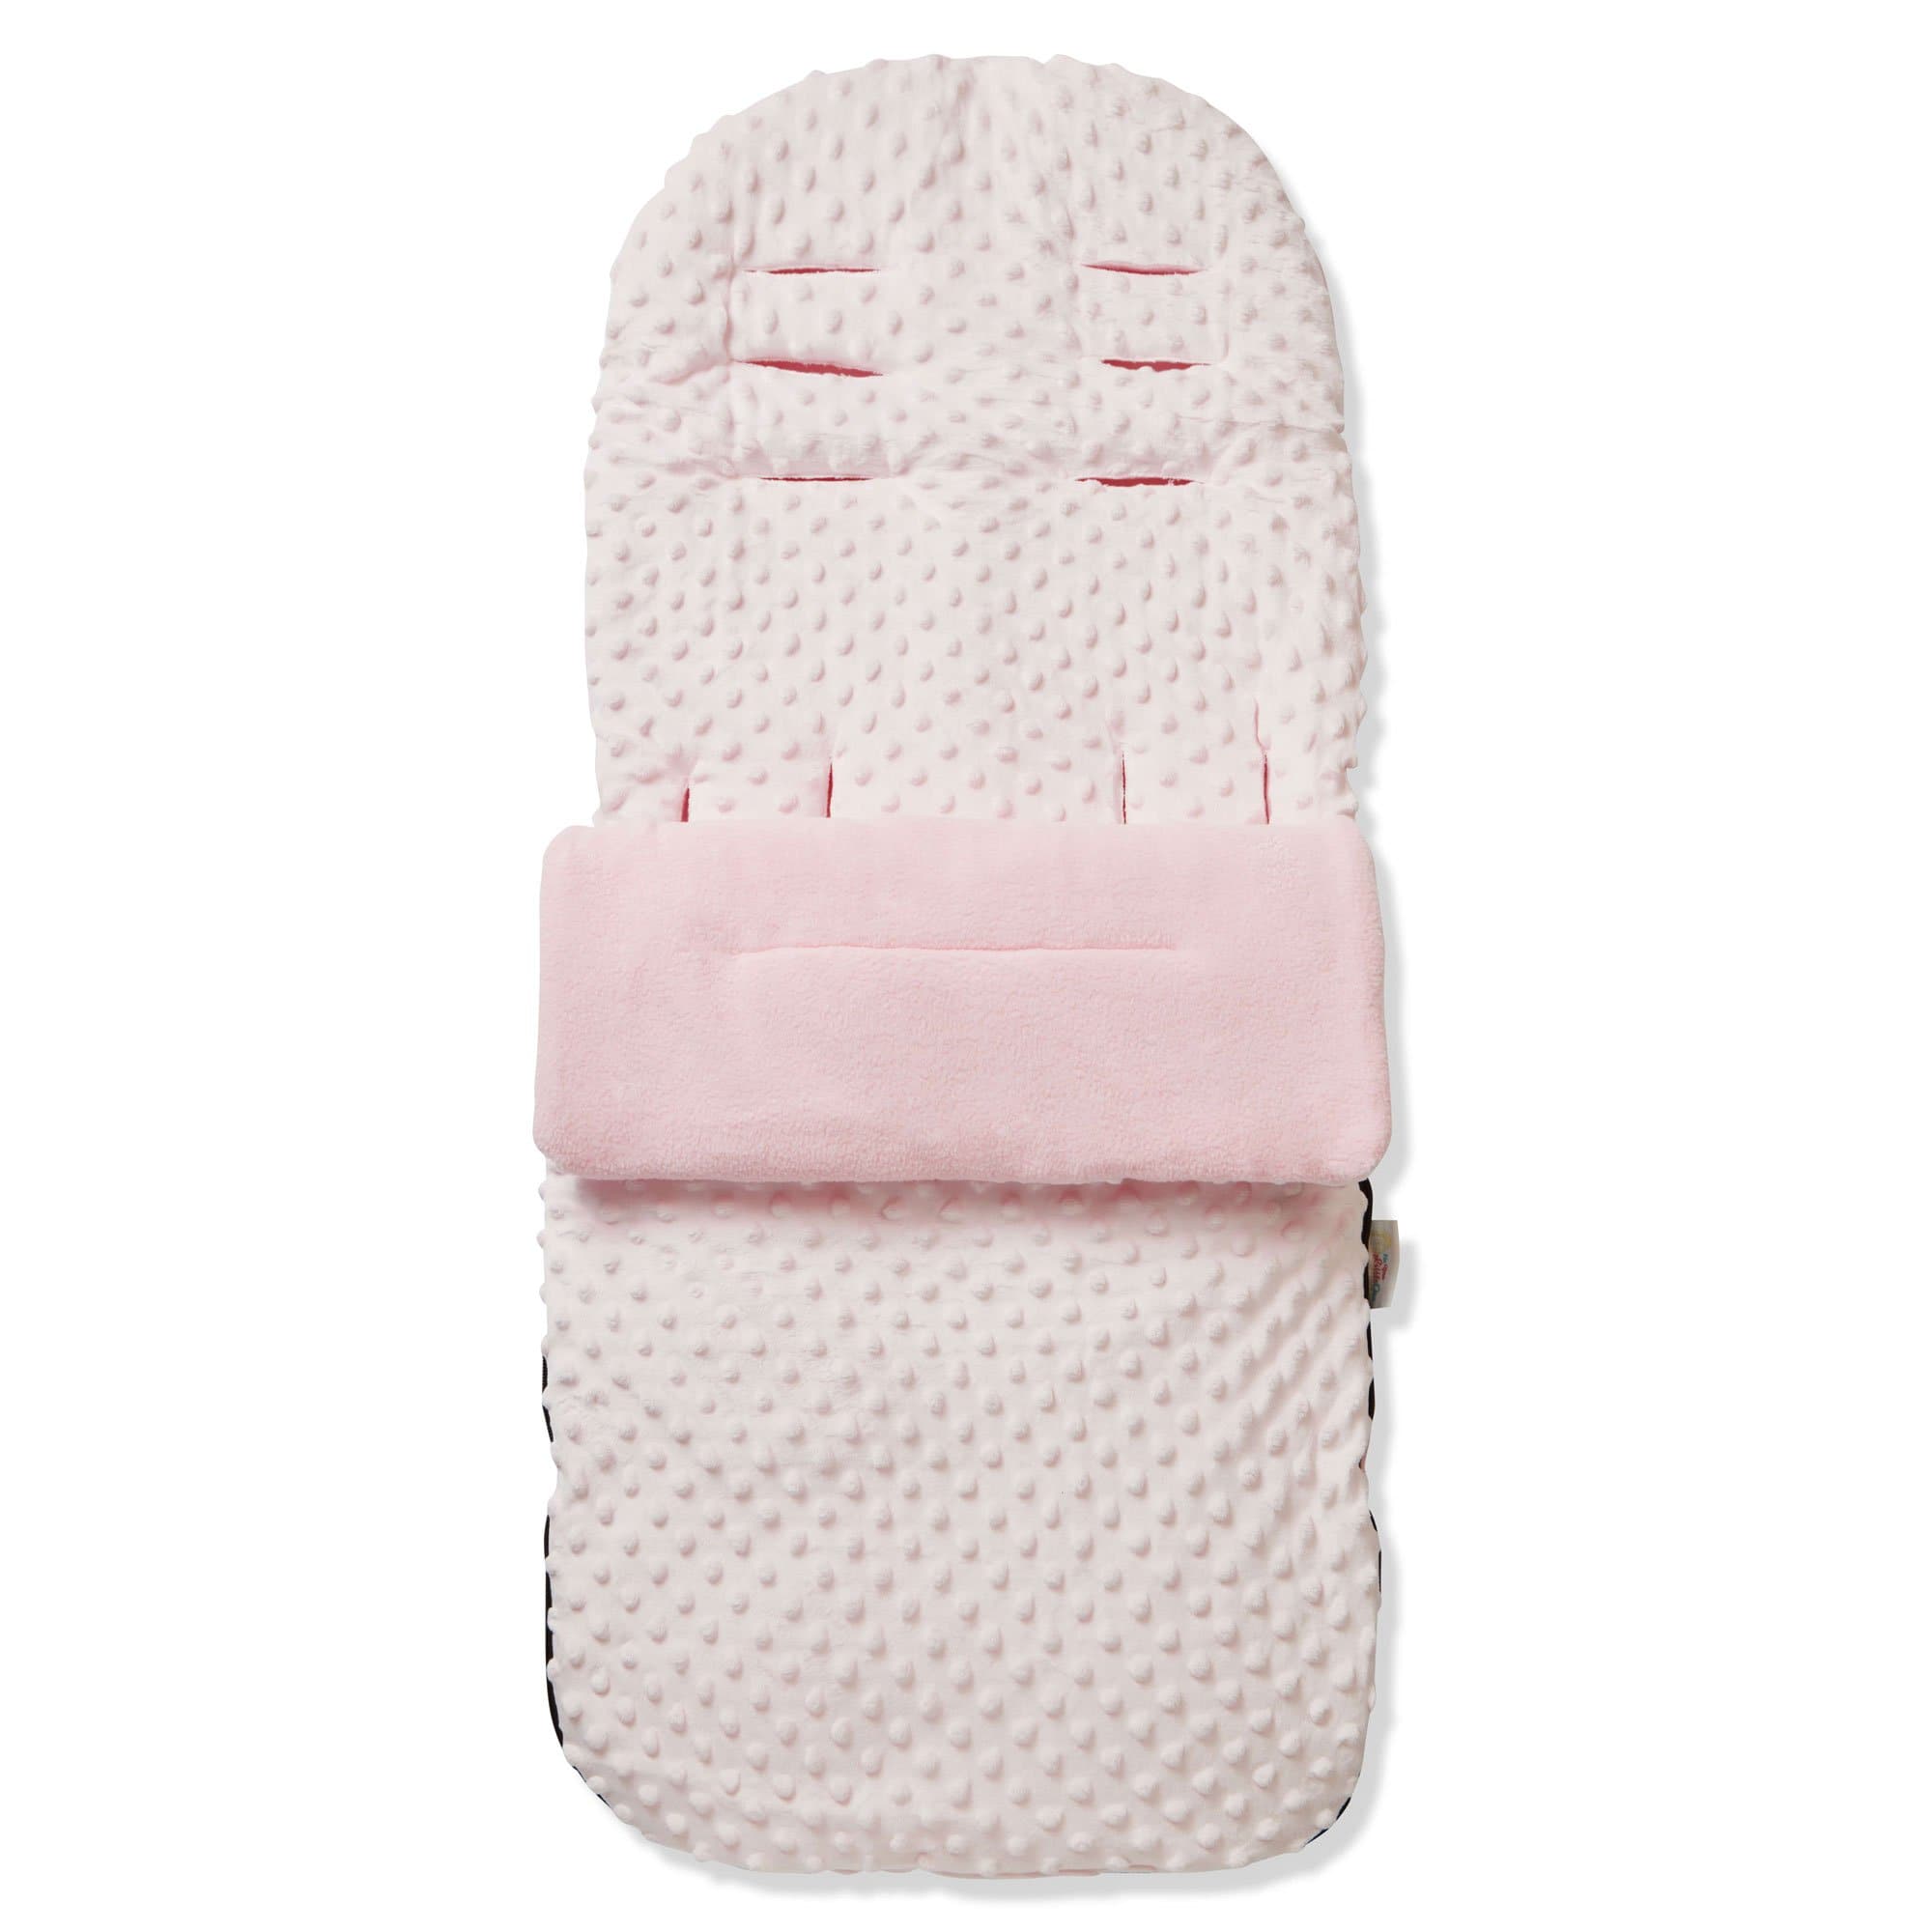 Dimple Footmuff / Cosy Toes Compatible with Cosatto - Pink / Fits All Models | For Your Little One